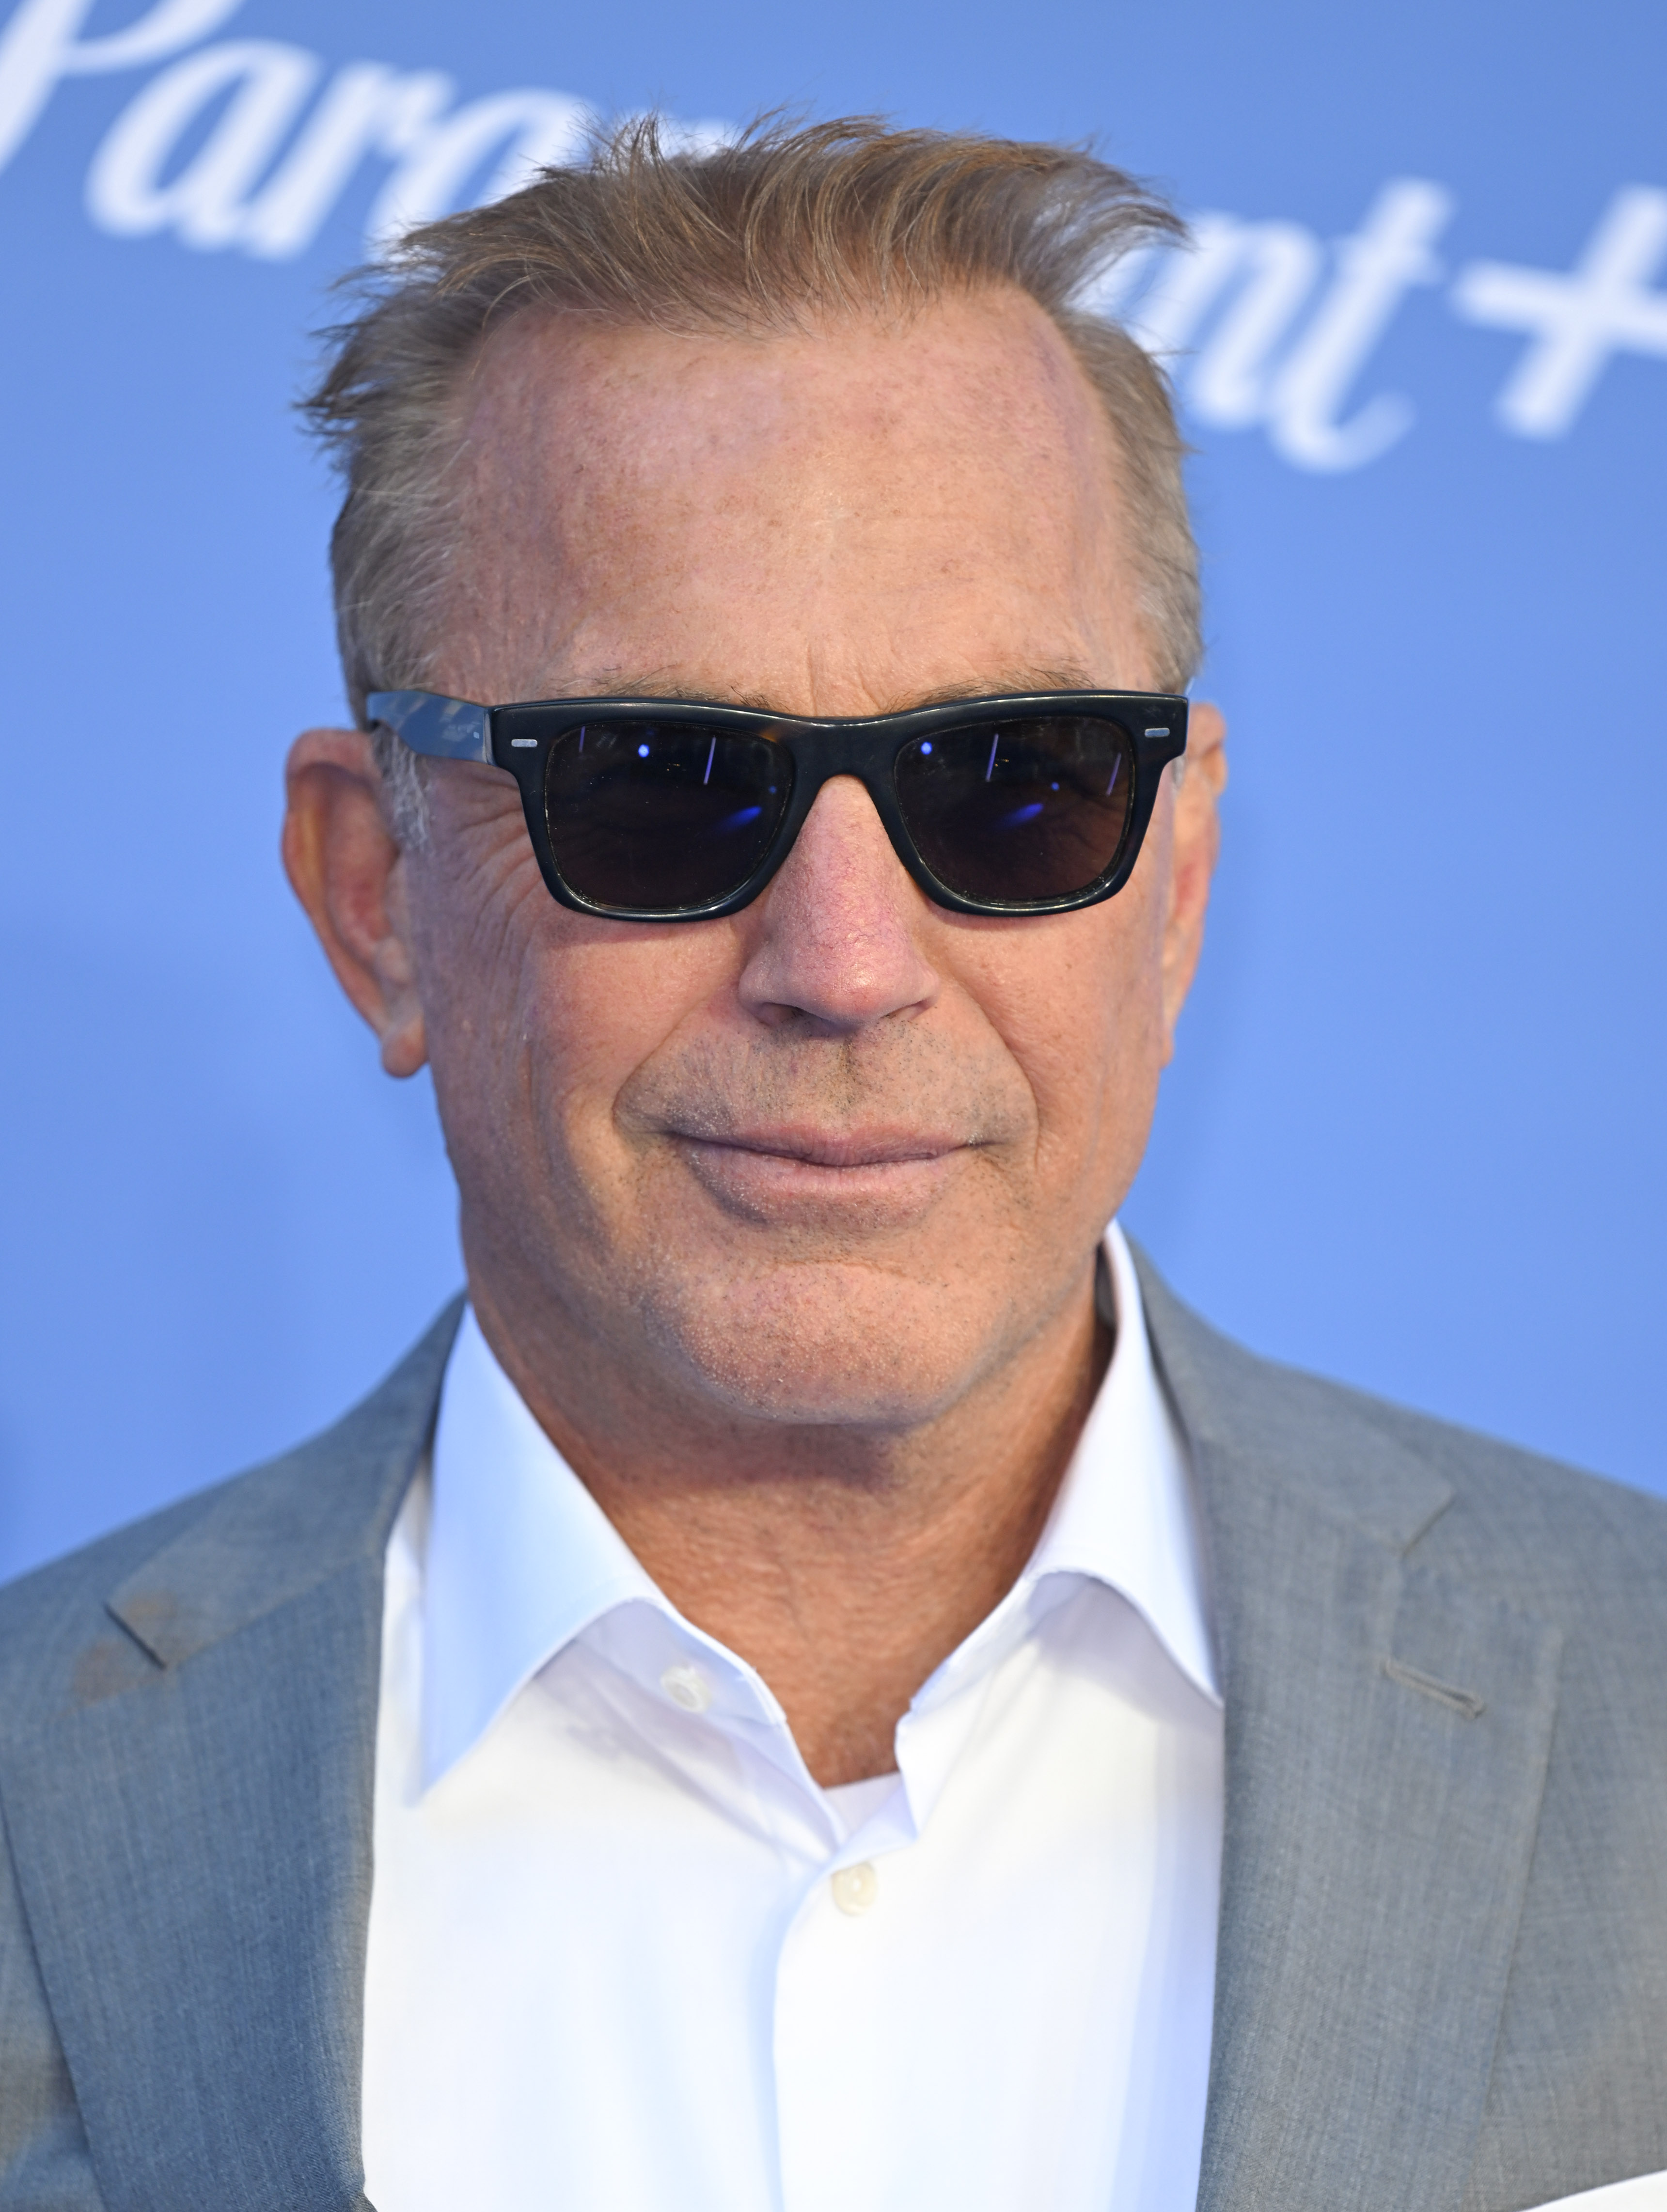 Kevin Costner at the Paramount+ UK Launch in London, 2022 | Source: Getty Images